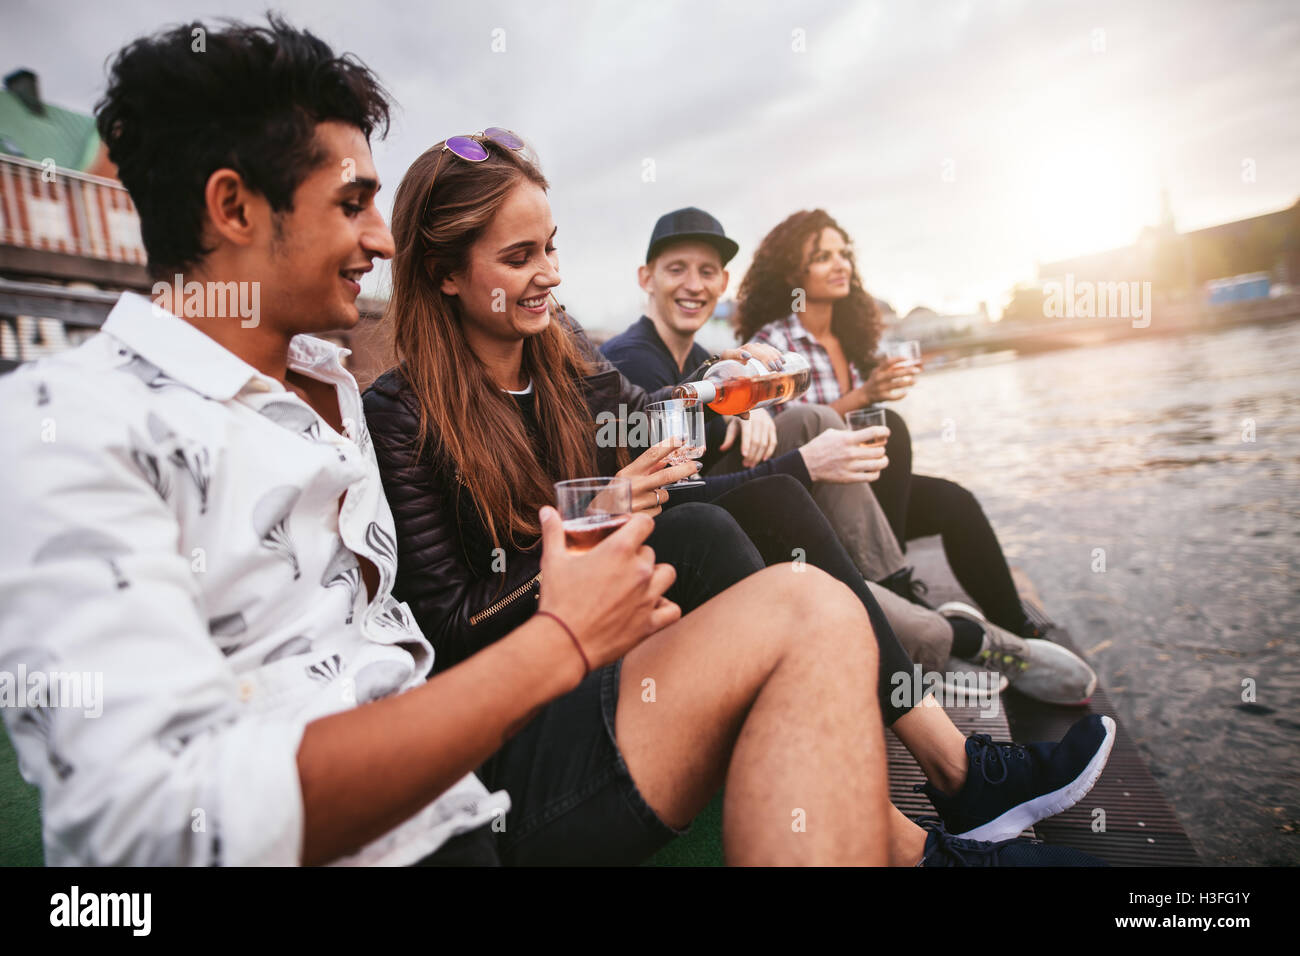 Shot of group of people sitting outdoors on jetty and having drinks. Friends hanging out on pier over lake in the city. Stock Photo